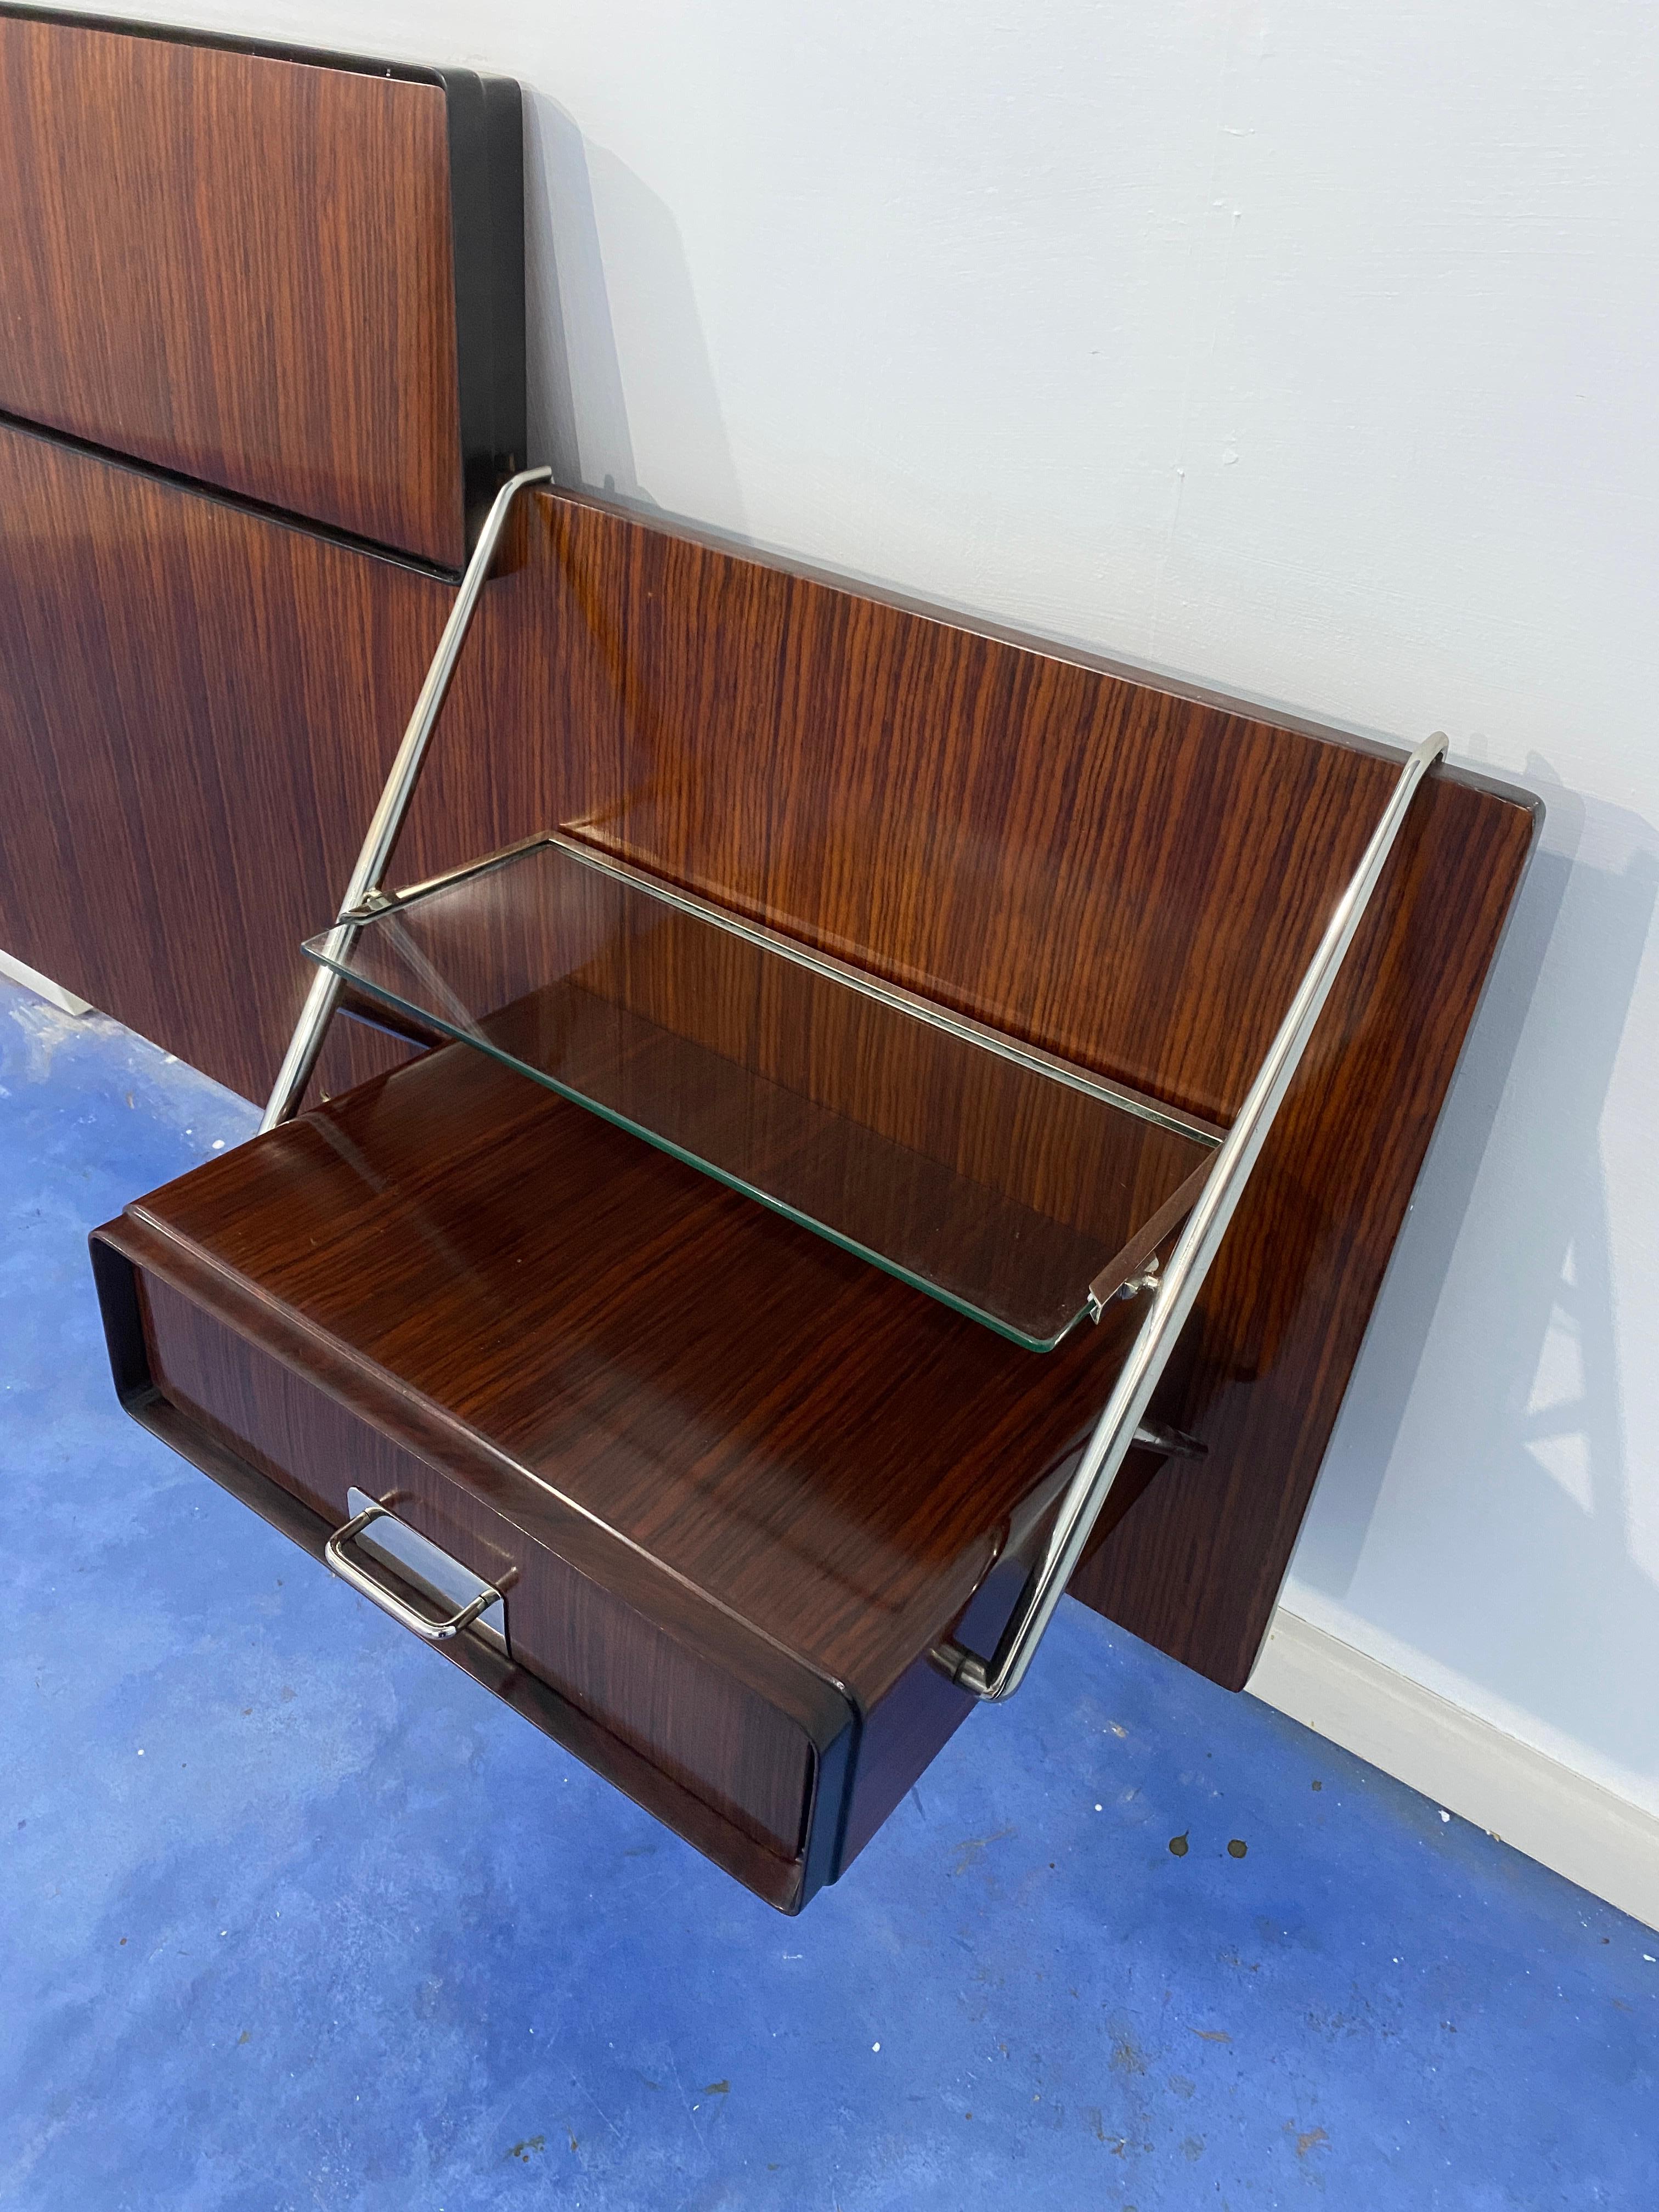 Italian nightstands from the 1950s with headboard bed designed by Silvio Cavatorta 11